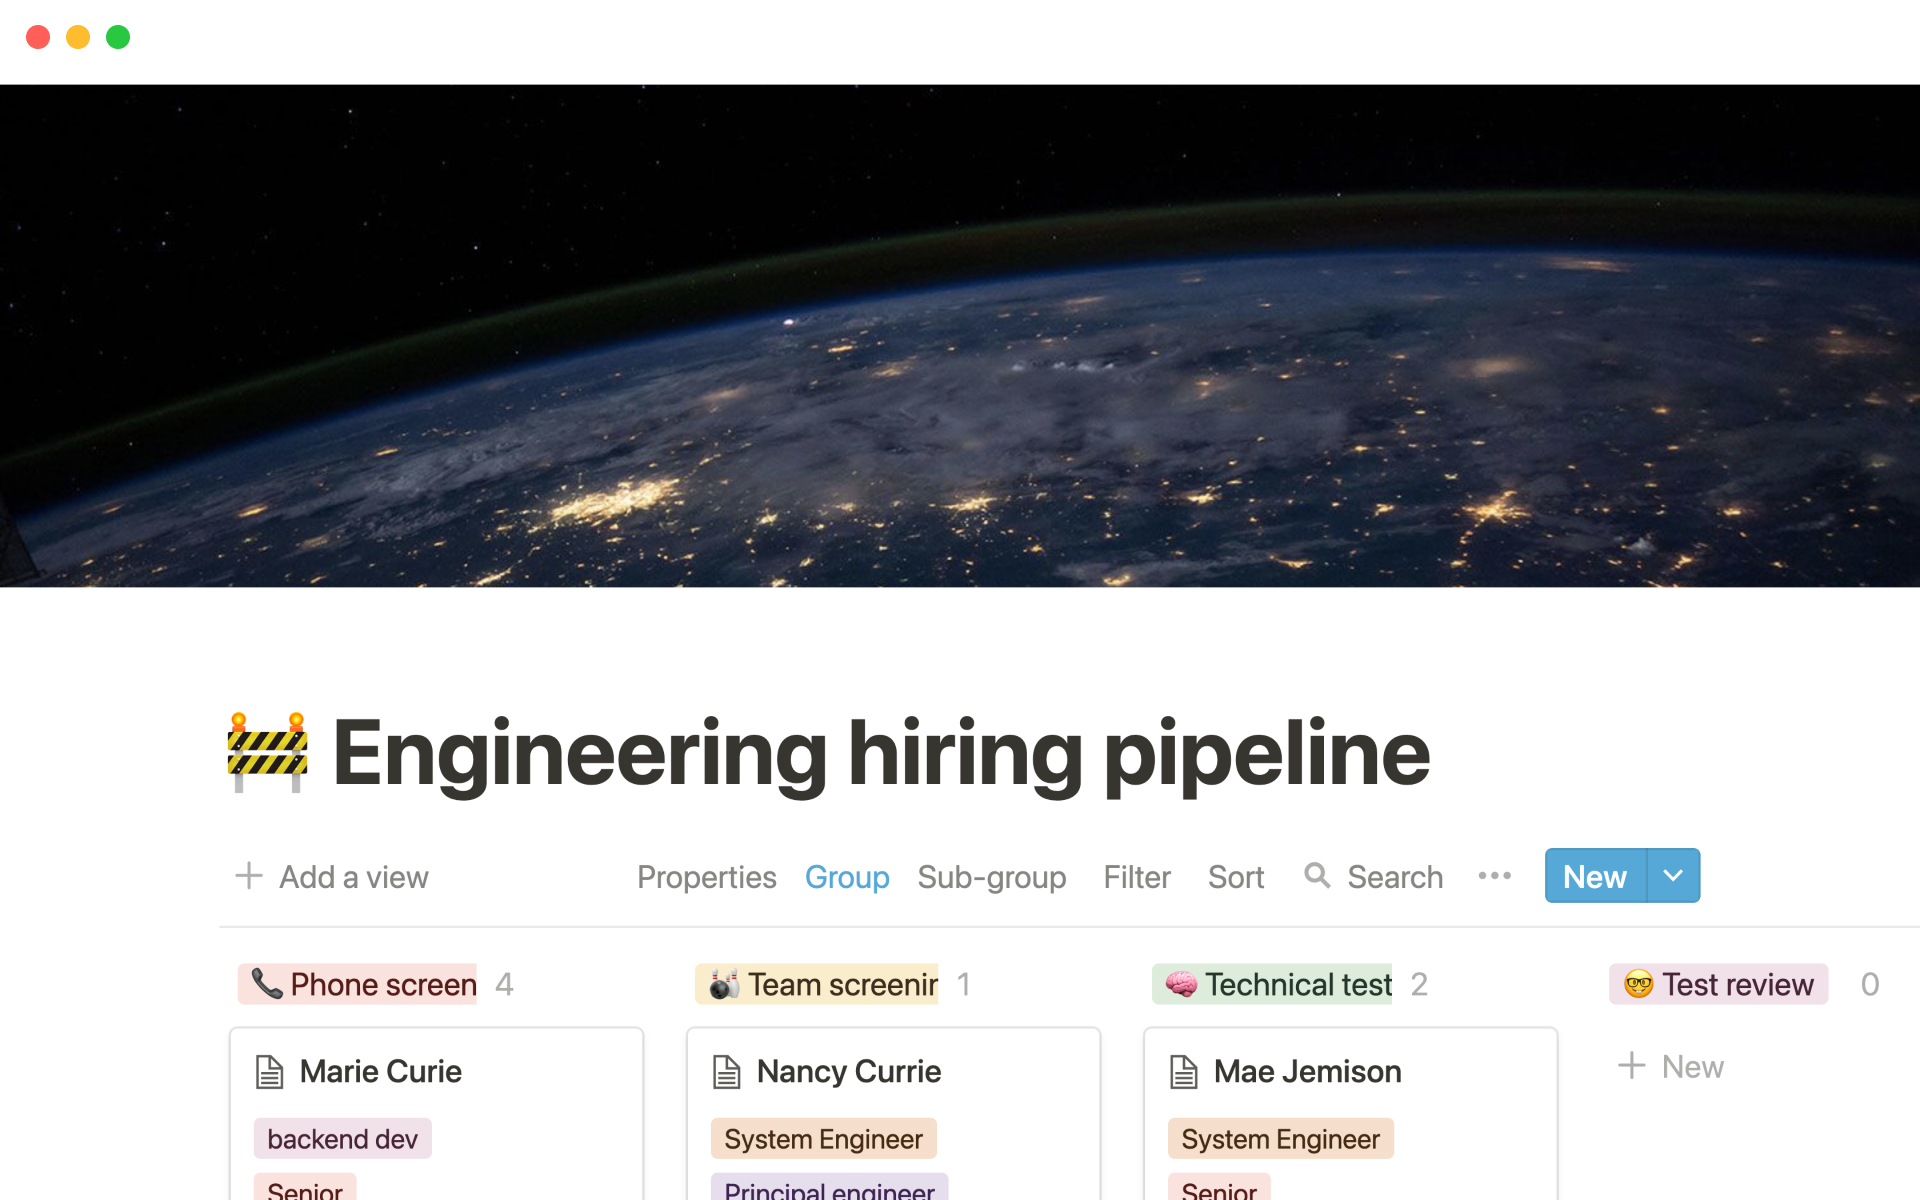 The desktop image for the Engineering hiring pipeline template